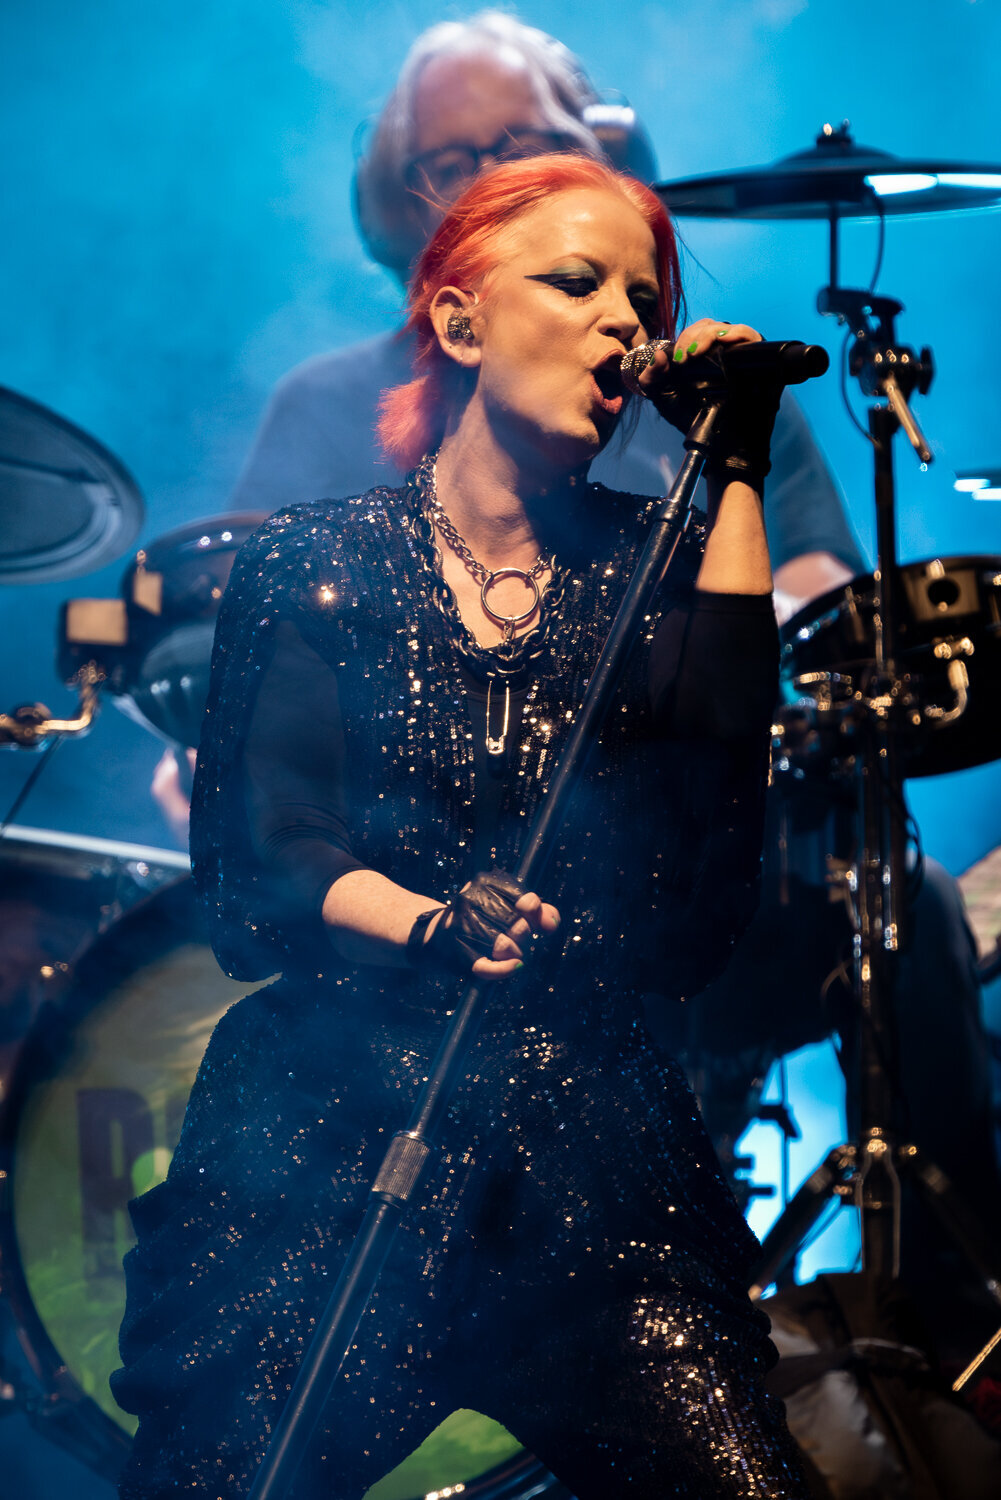 Shirley Manson - Chicago - RKH Images (1 of 1)